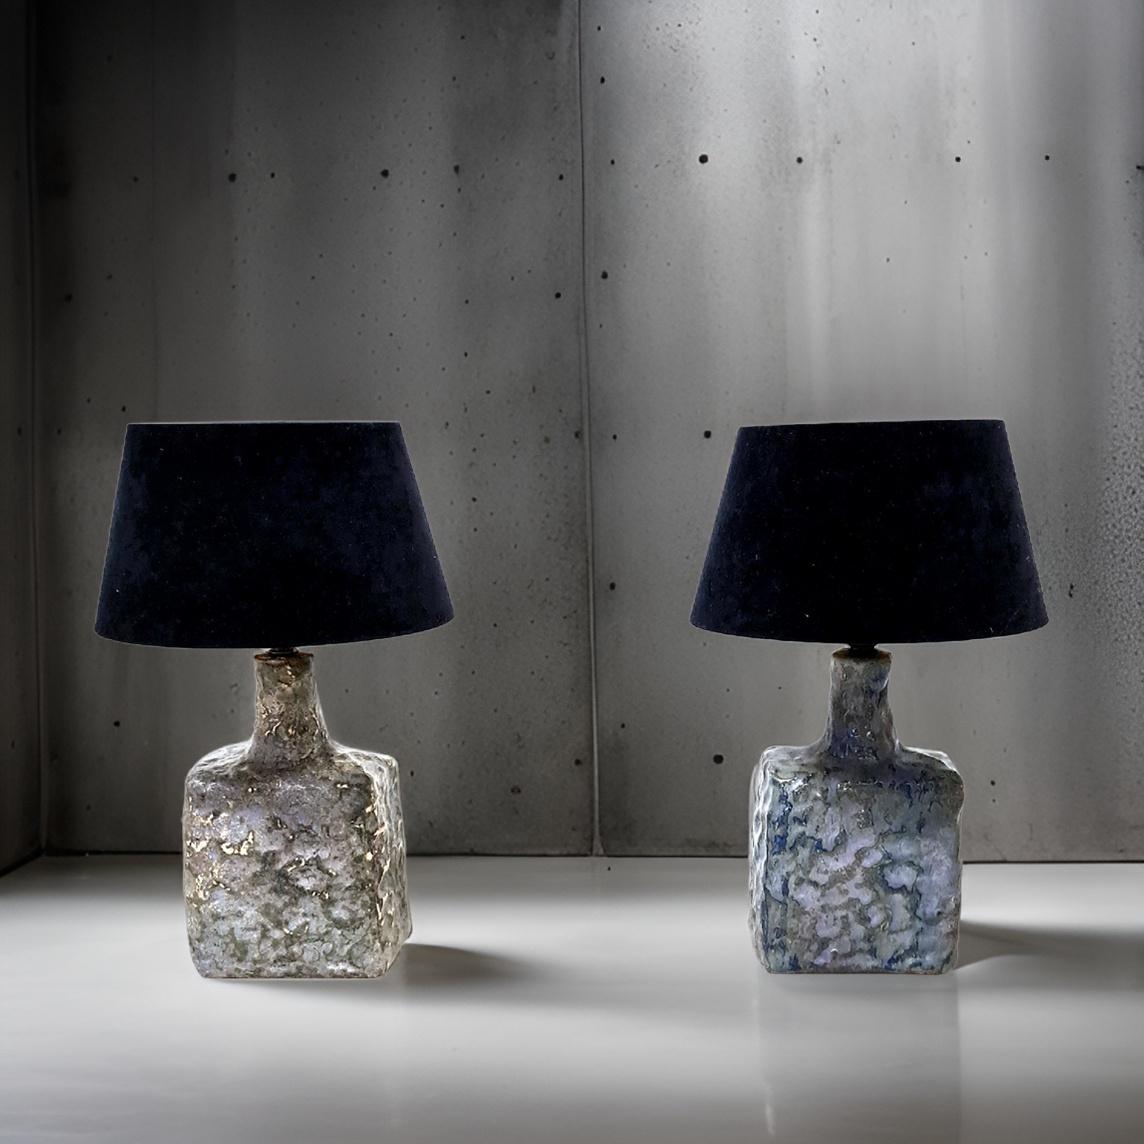 Set of 2 ceramic table lamps. Probably designed by Piet Knapper and manufactured by the Mobach ceramic studio. The lamps are made from ceramic and glazed in blueish gray. The texture in the lamps give great shading. The lamps are handmade and